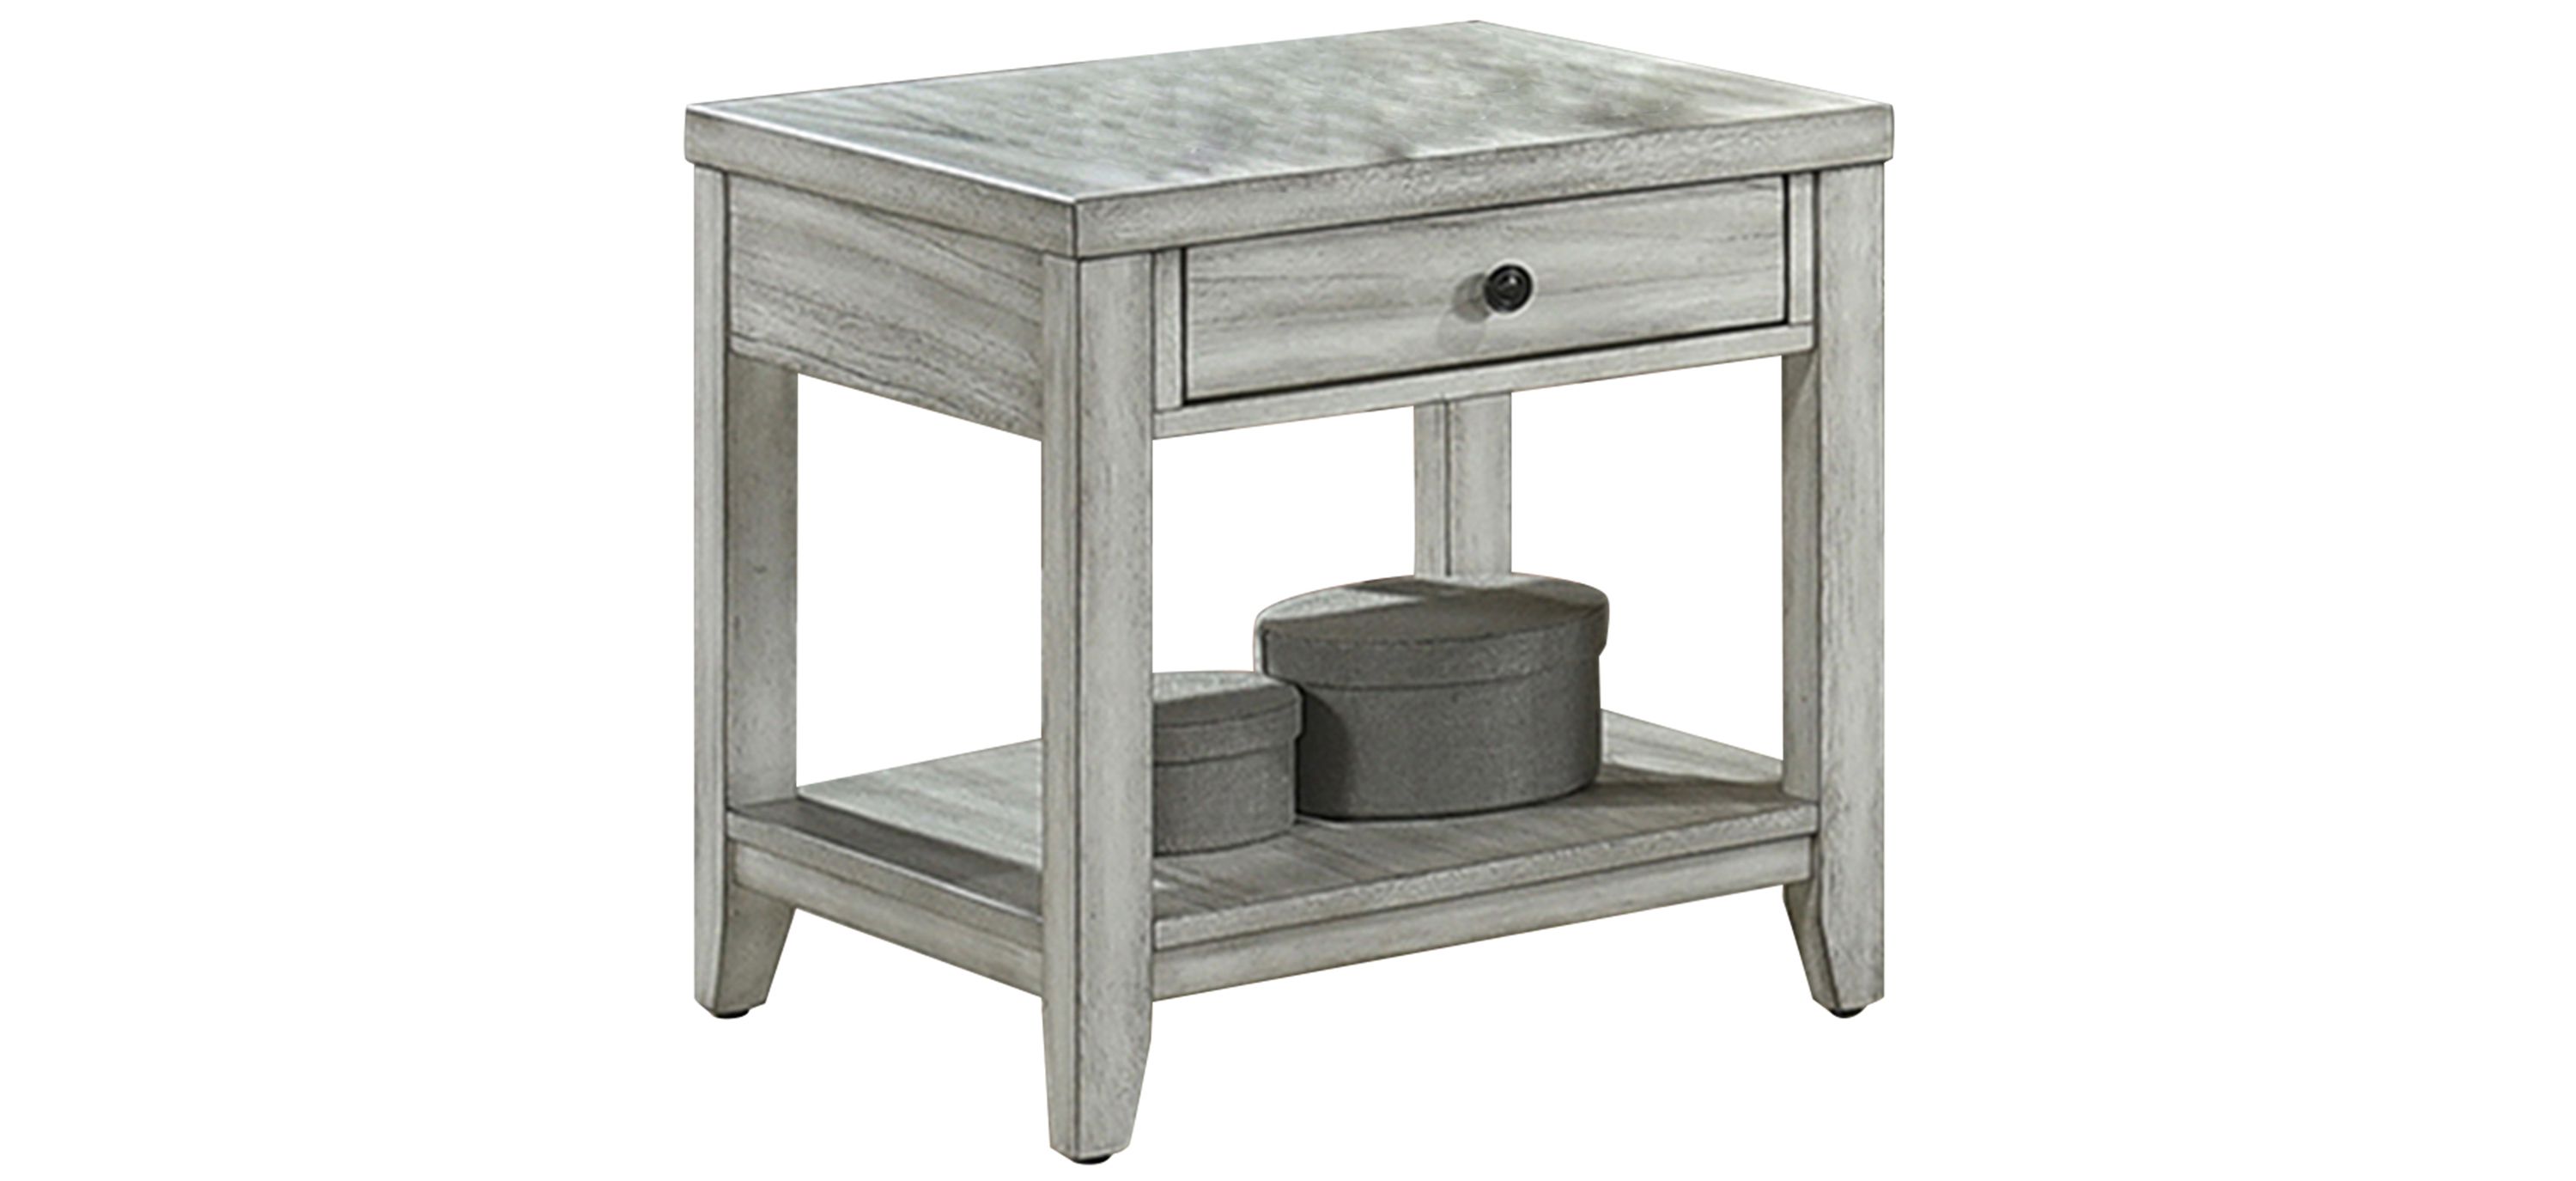 Summer Winds Square End Table